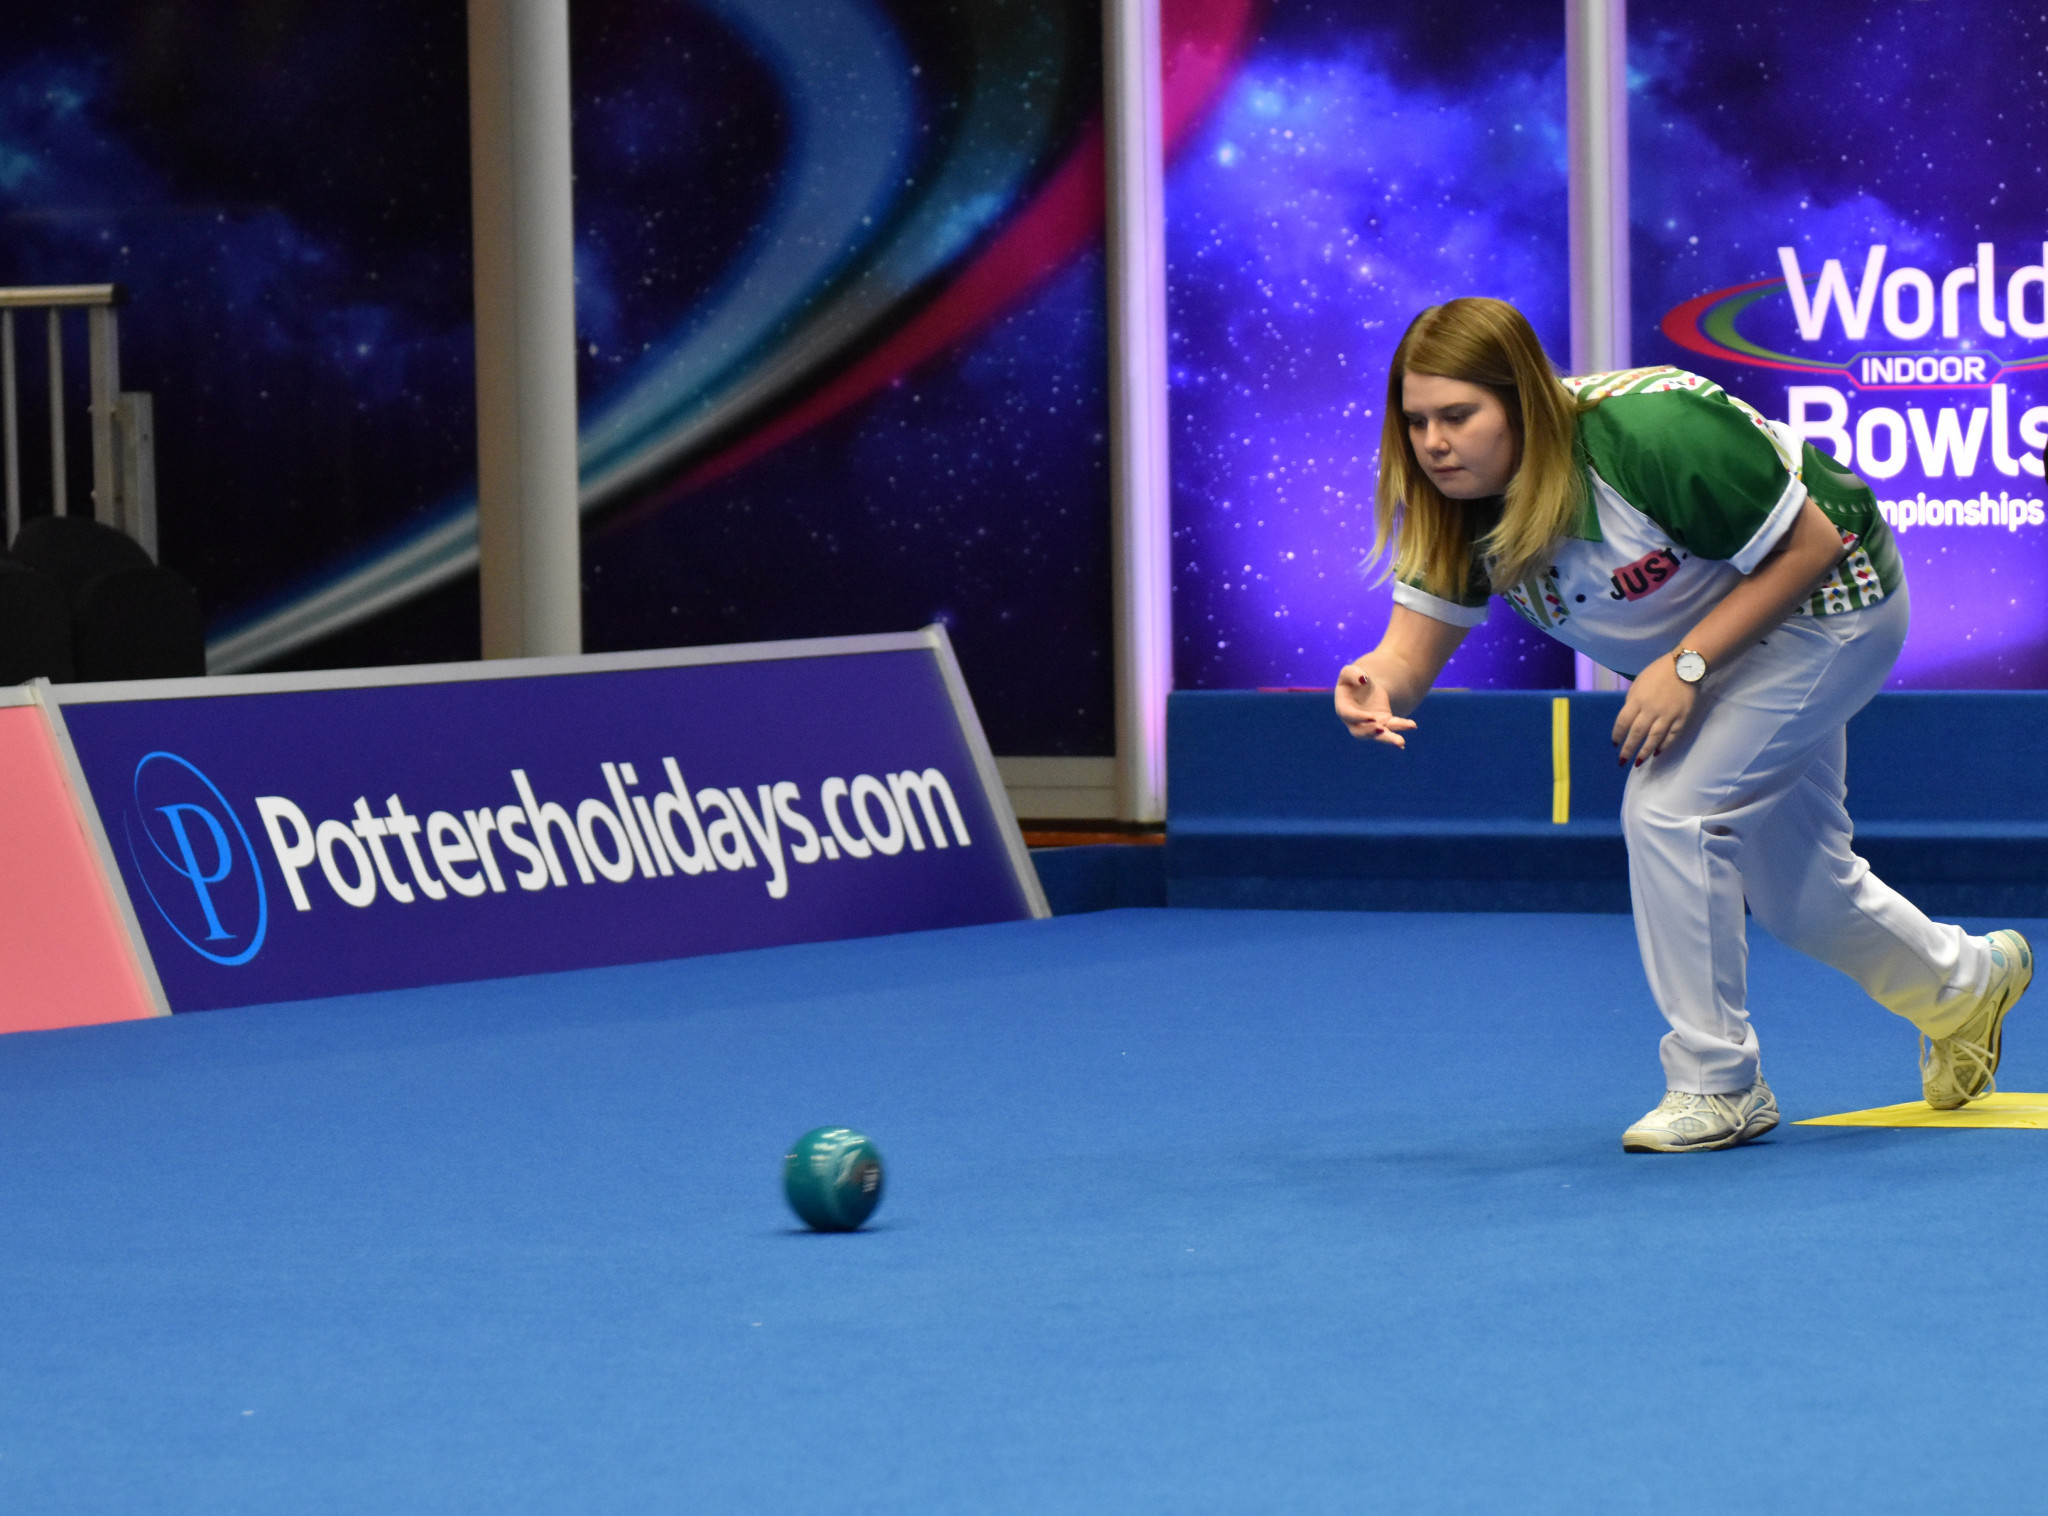 Katherine Rednall and her playing partner Greg Harlow enjoyed strong local support in their World Indoor Bowls Championships mixed doubles semi-final - but they were unable to progress ©WorldBowlsTour